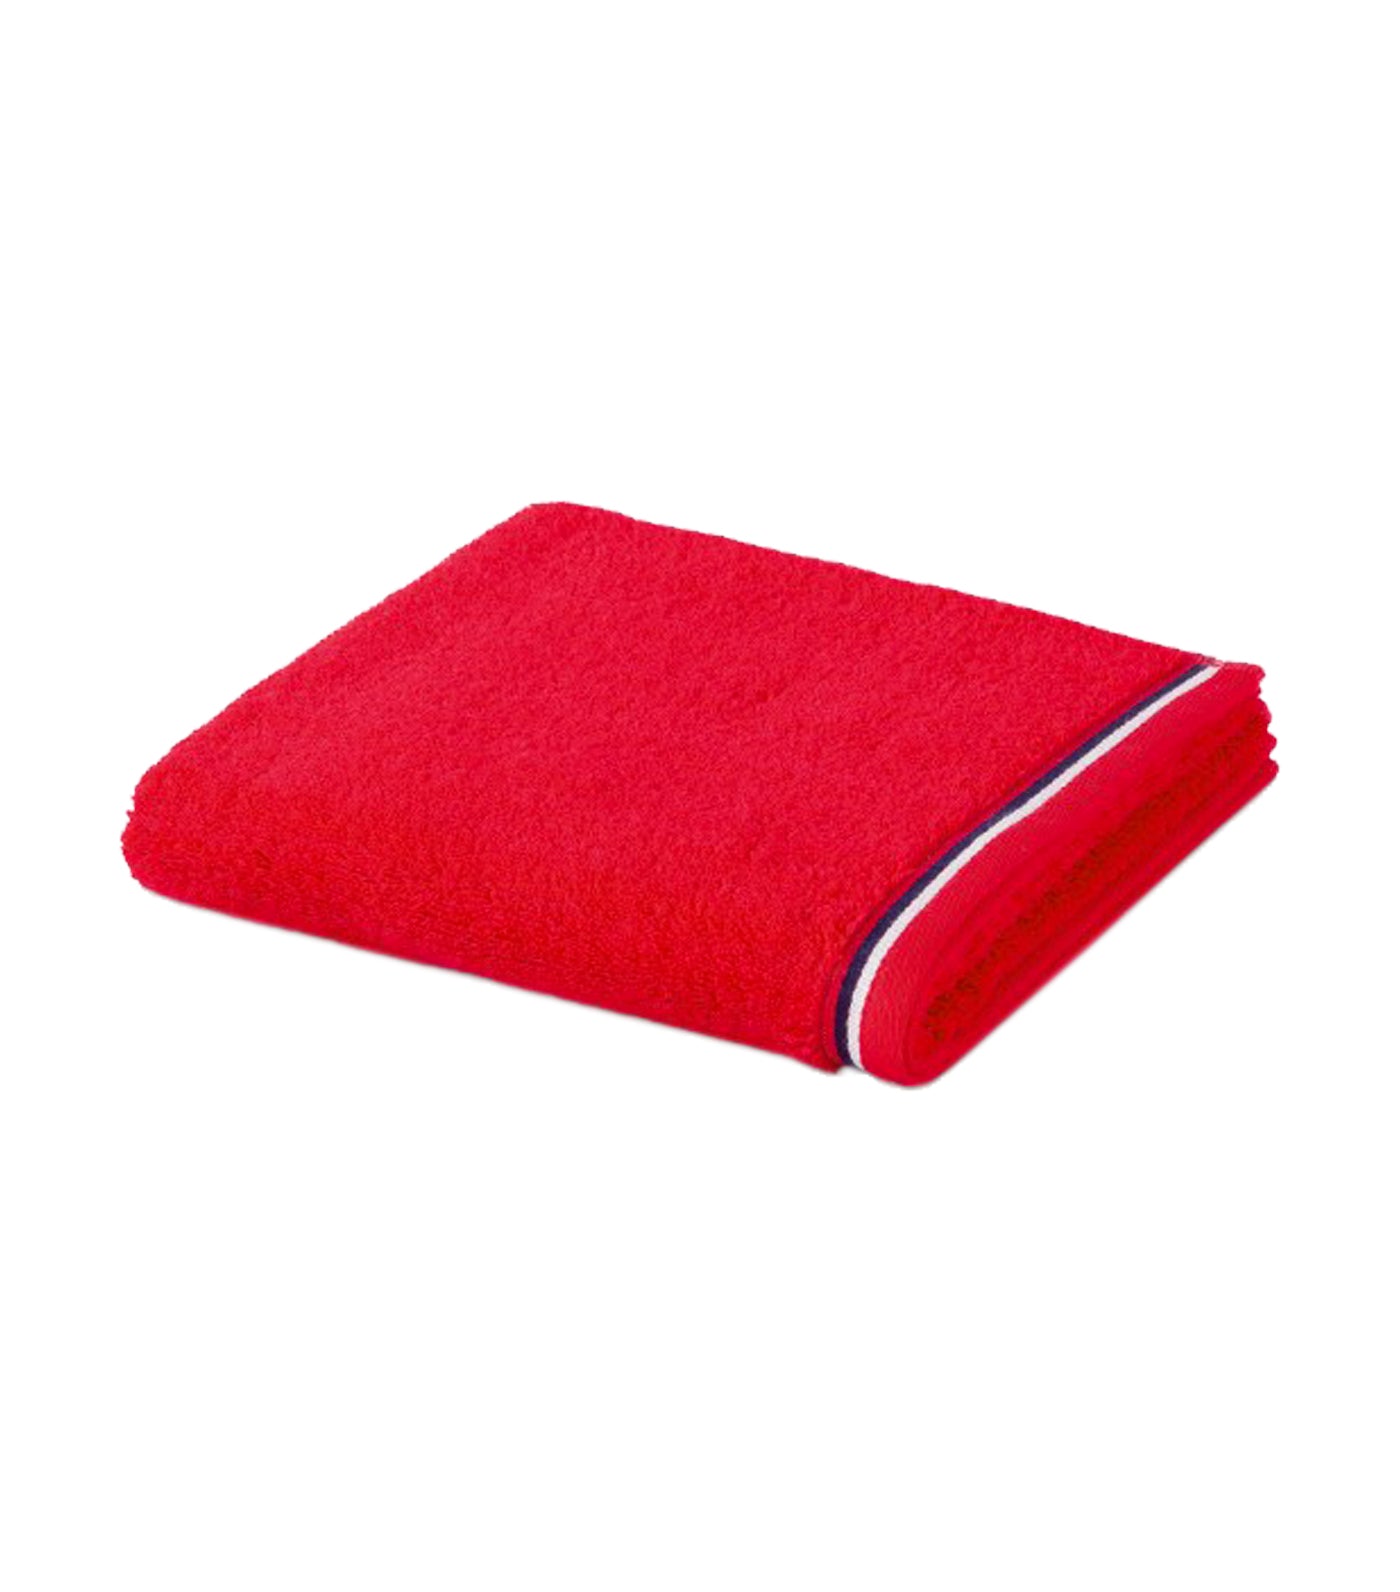 möve athleisure collection, red - bath and shower towel